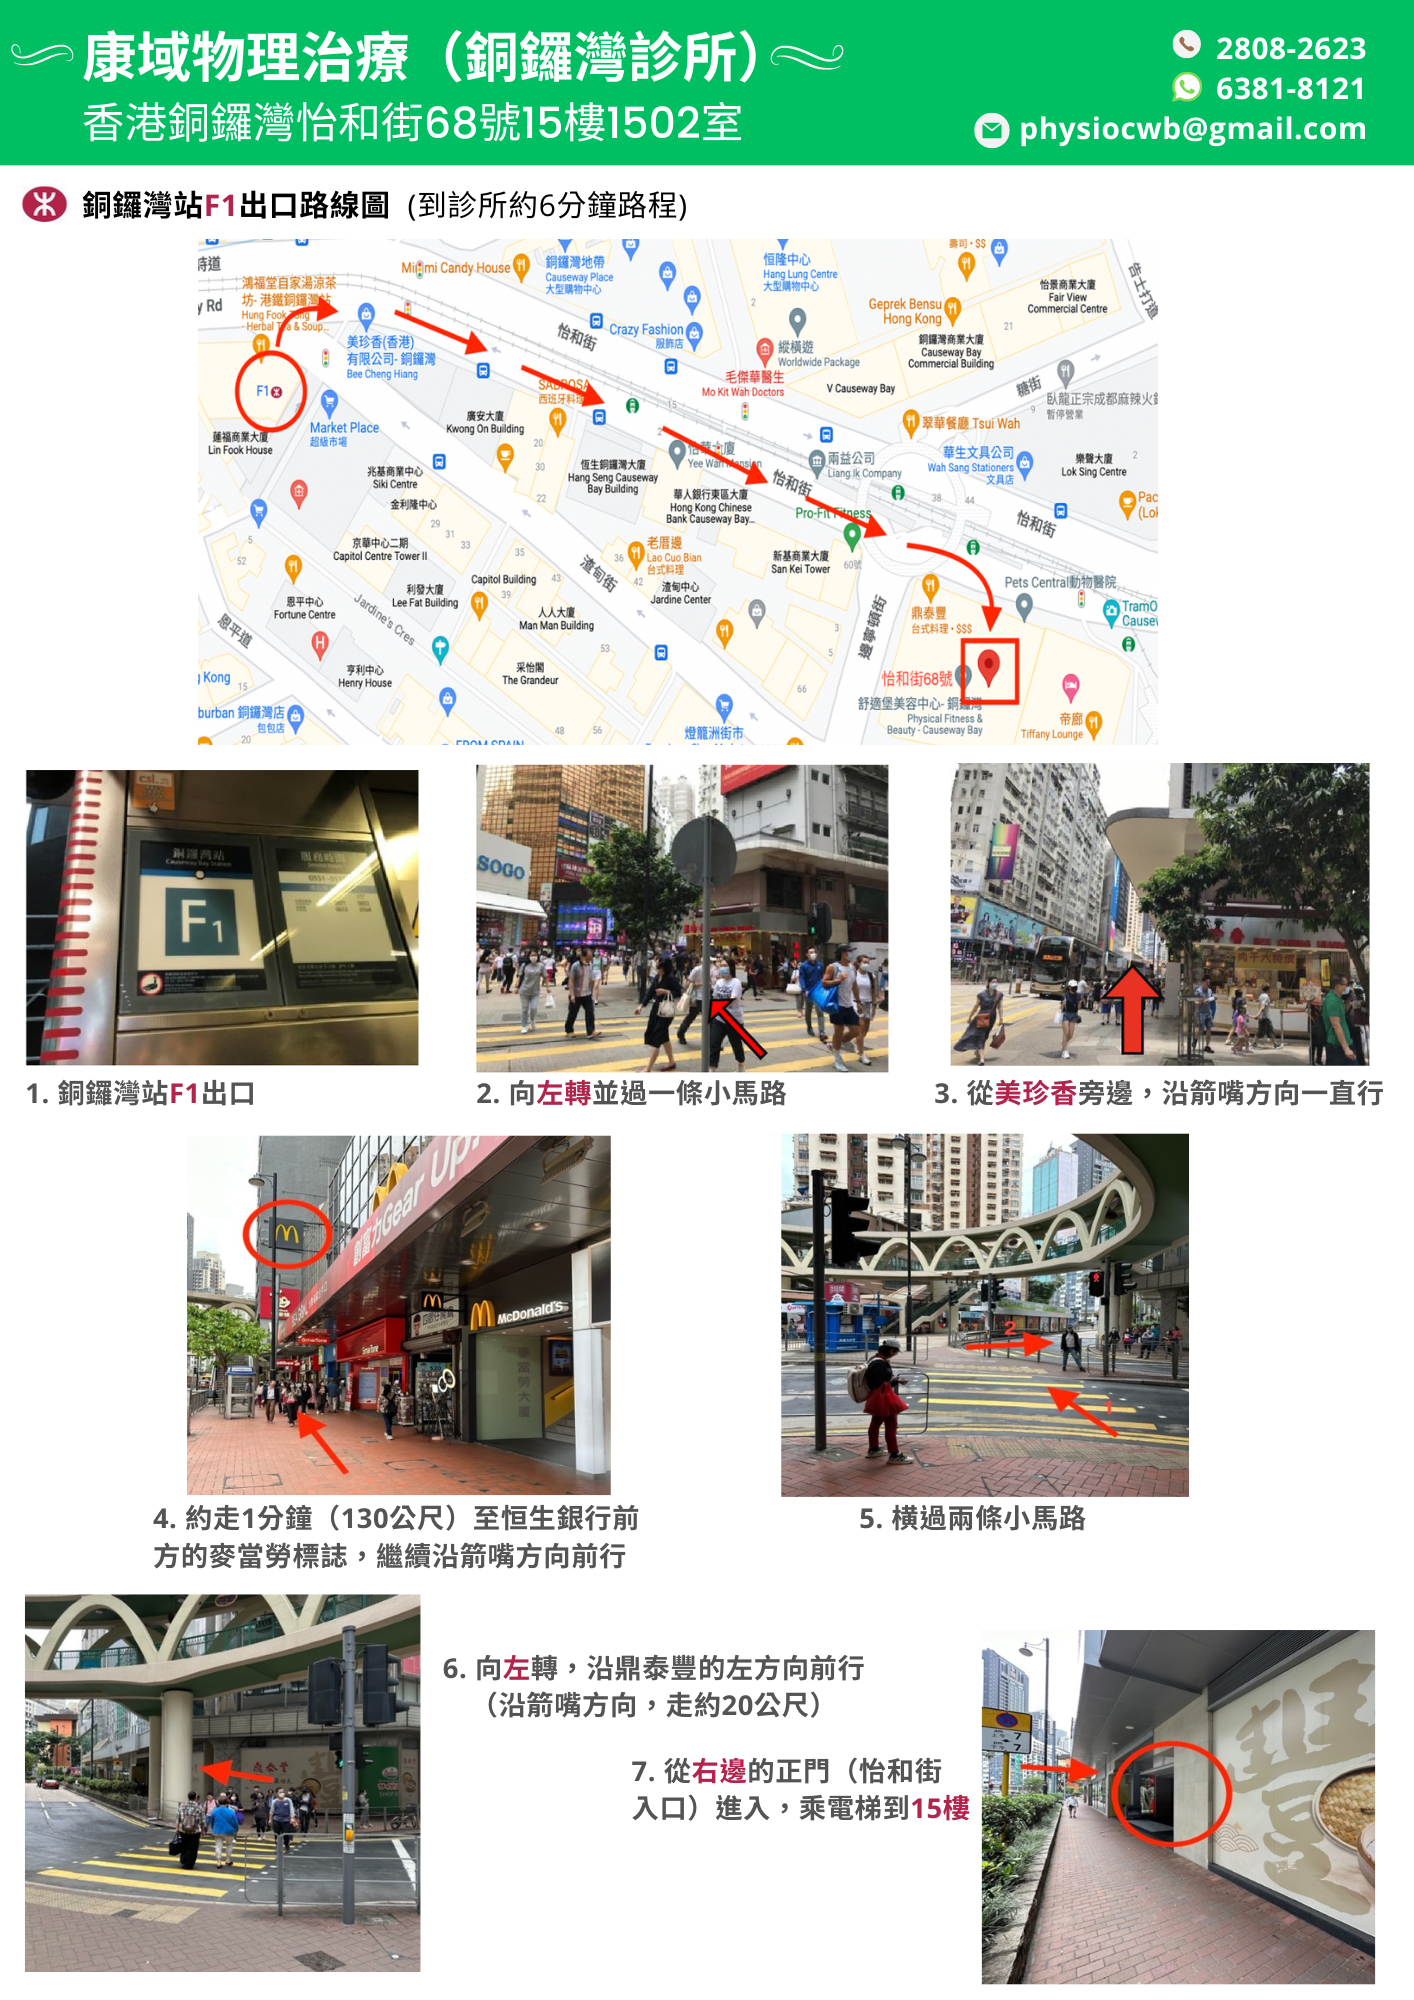 cwb-route-map-mtr-chinese.png